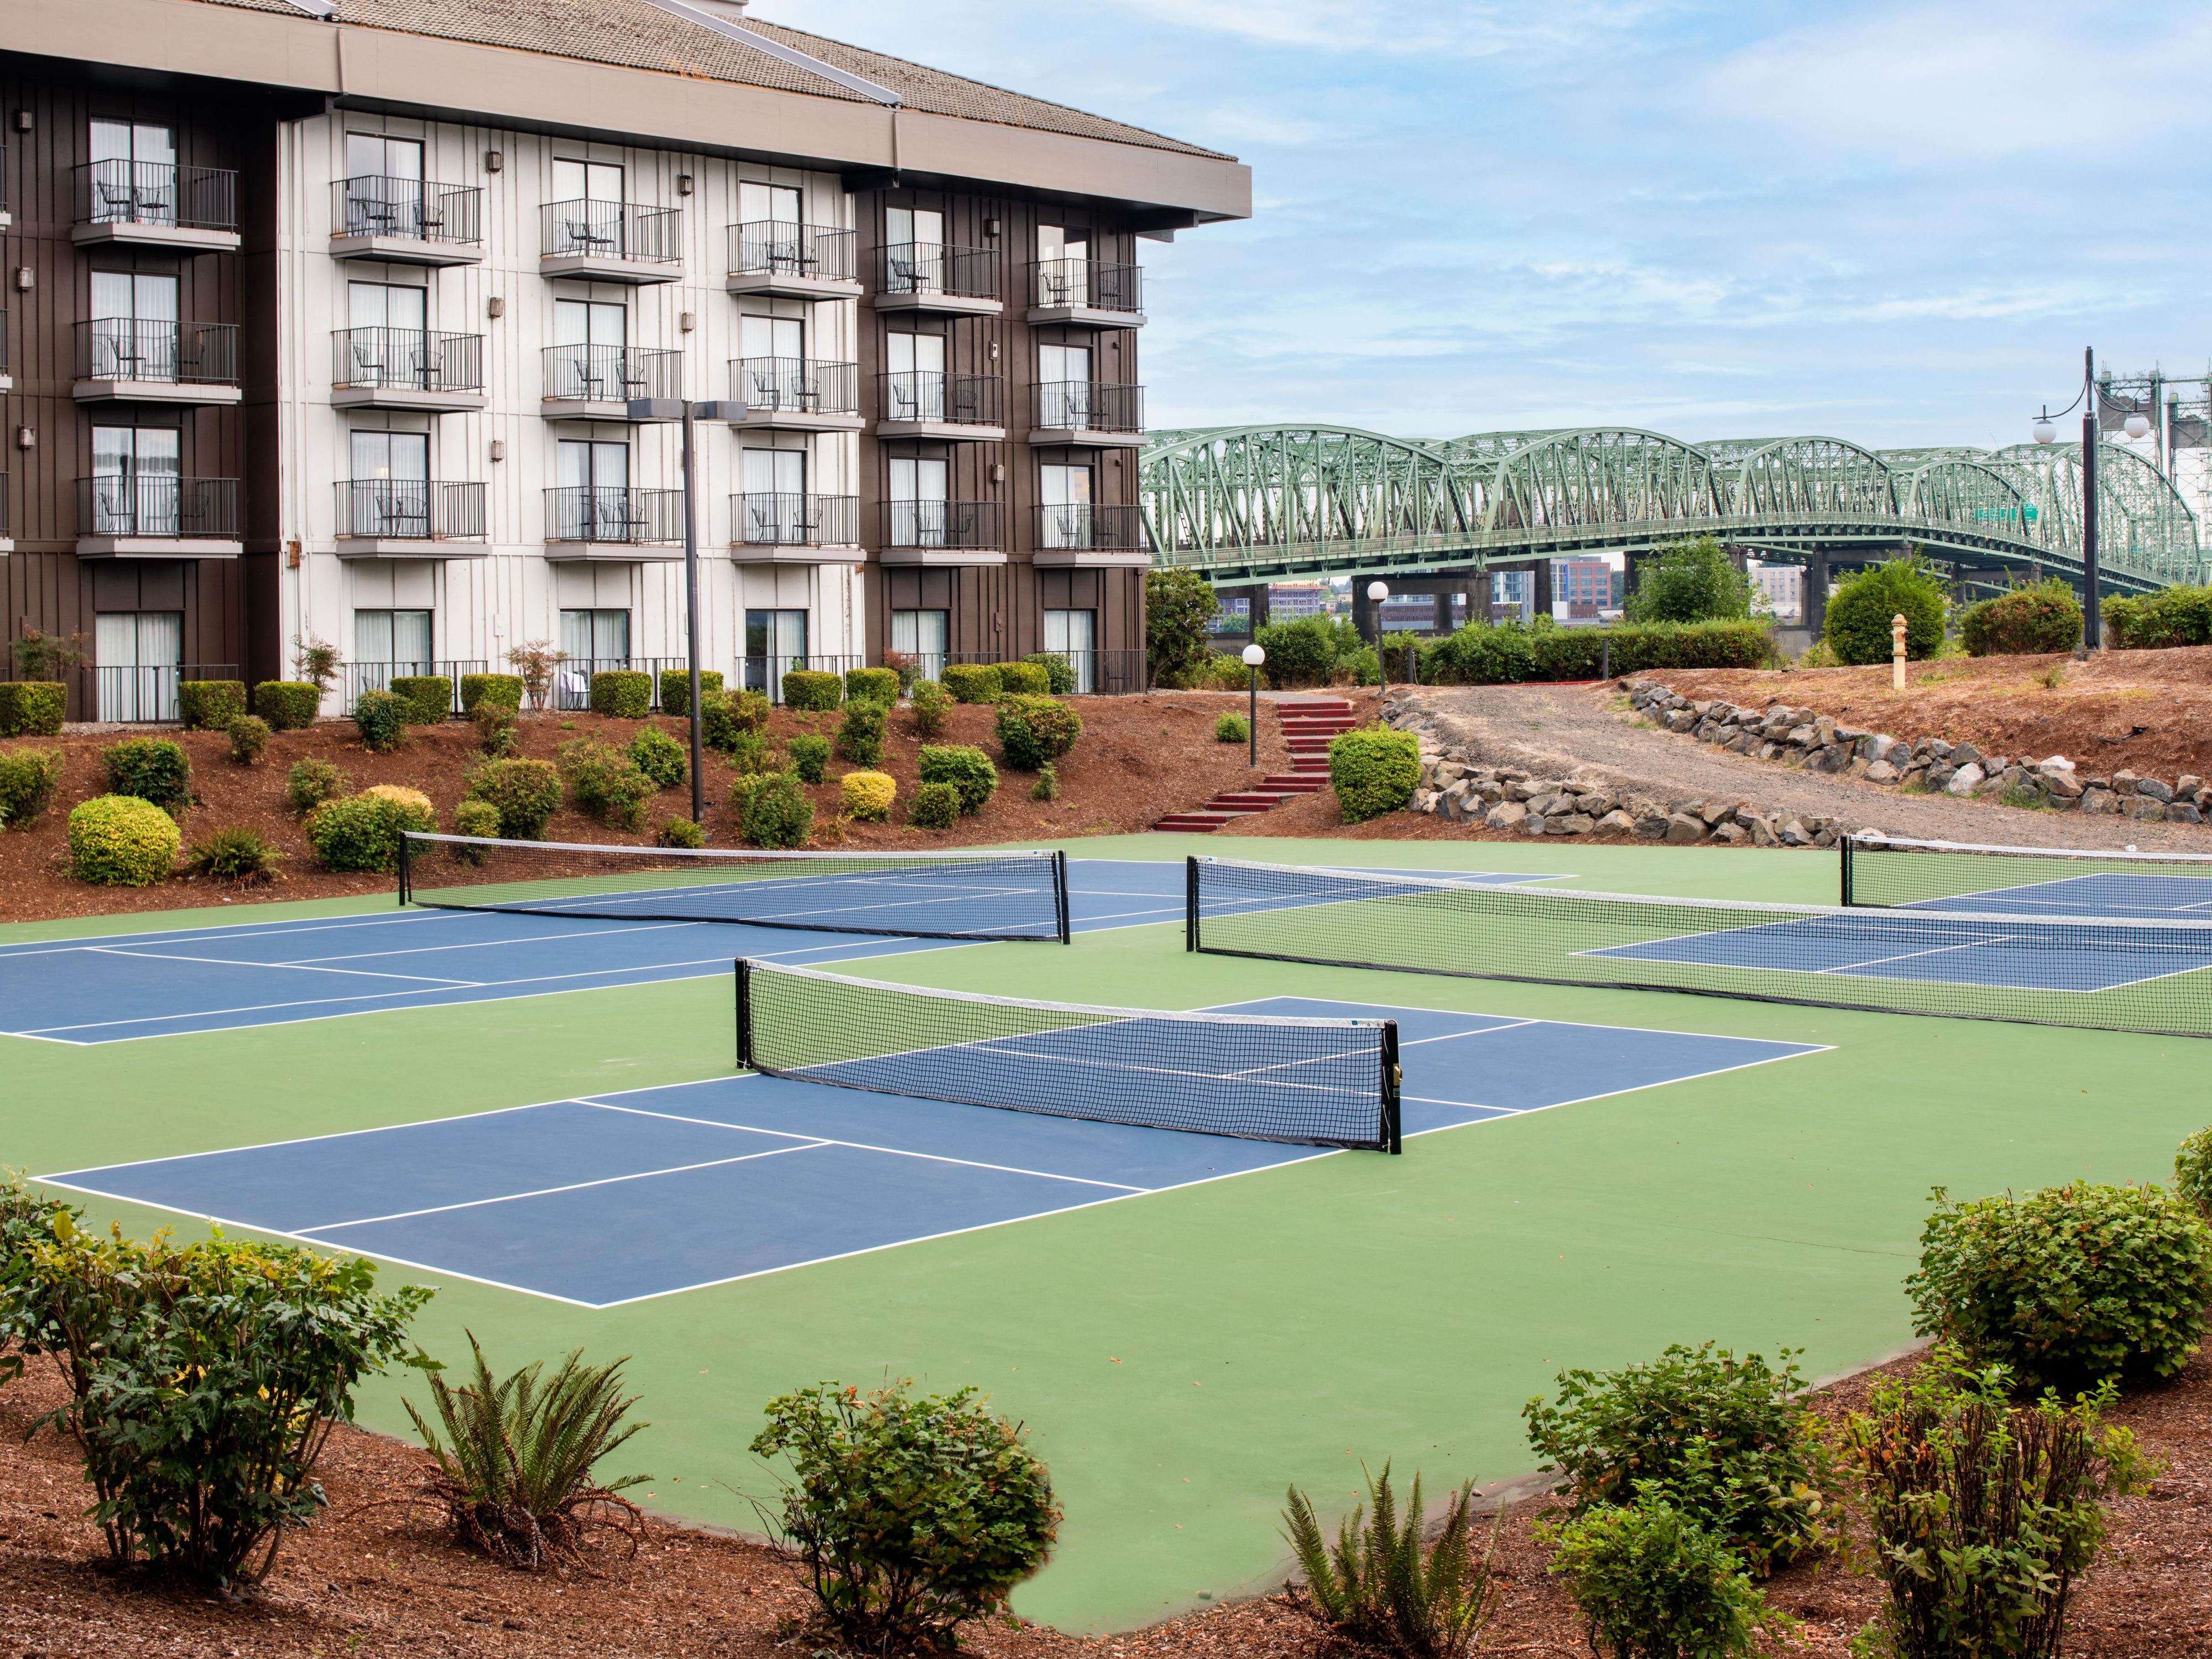 Play a game of tennis or pickleball on our riverside courts, where equipment can be borrowed from the front desk. Work out in our Fitness Center offering cardio and training equipment. Take a dip in our seasonal outdoor pool and hot tub. Relax with a drink from the bar and enjoy views and resort-style ambiance along the Portland riverfront.